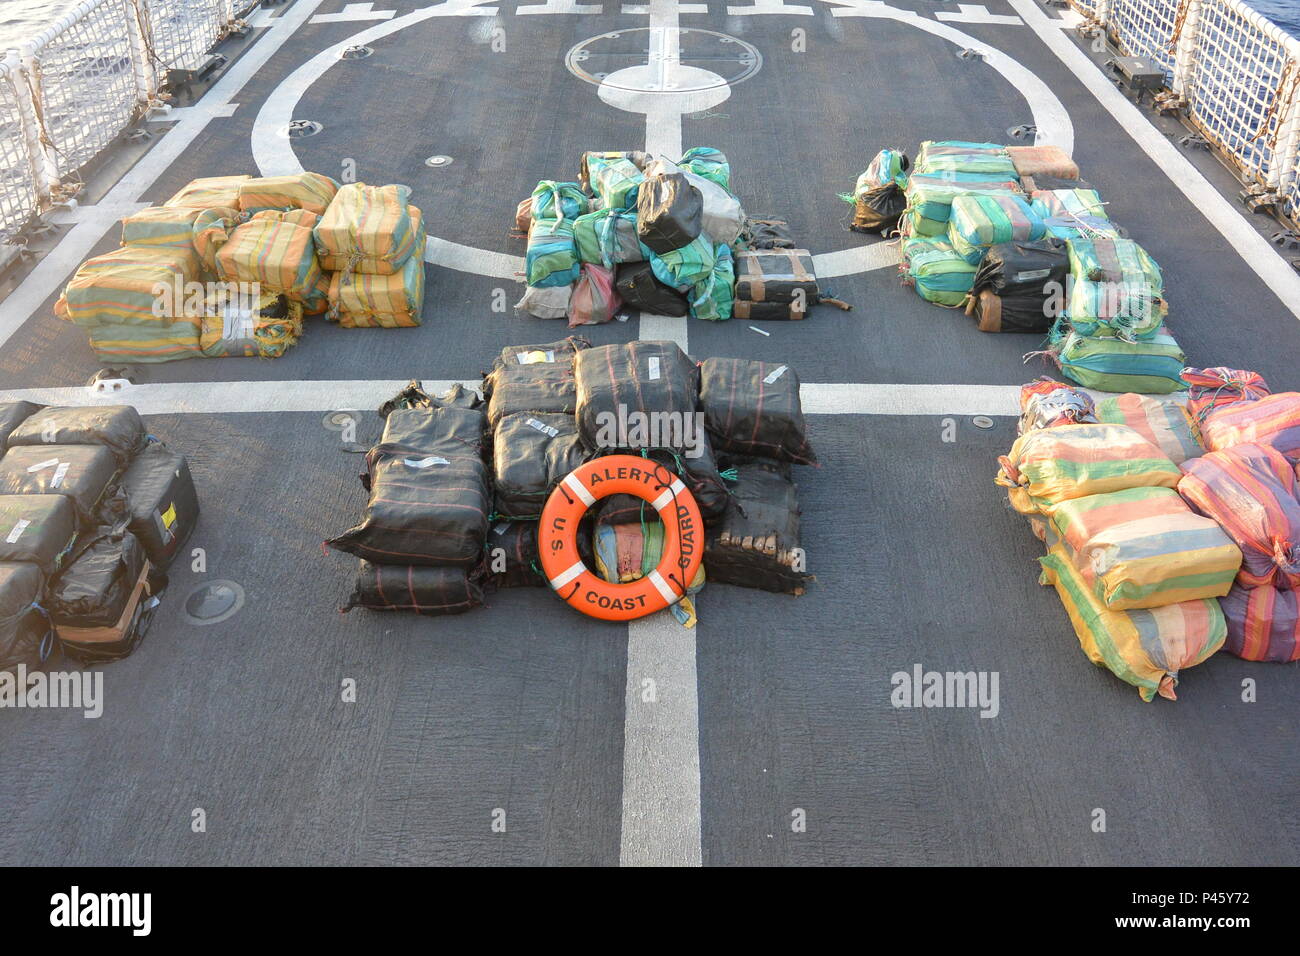 Cutter Alert had a record seizure of 3.3 tons of cocaine neatly piled on the flight deck during its 53-day counter-drug patrol that spanned 12,500 miles in the Eastern Pacific. These counter-drug interdictions in the Western Hemisphere Transit Zone off the coasts of South and Central America, were carried out in support of Operation Martillo, an international operation focused on sharing information and bringing together air, land, and maritime assets from the U.S. Department of Defense, the Department of Homeland Security, and Western Hemisphere and European partner nation agencies to counter Stock Photo